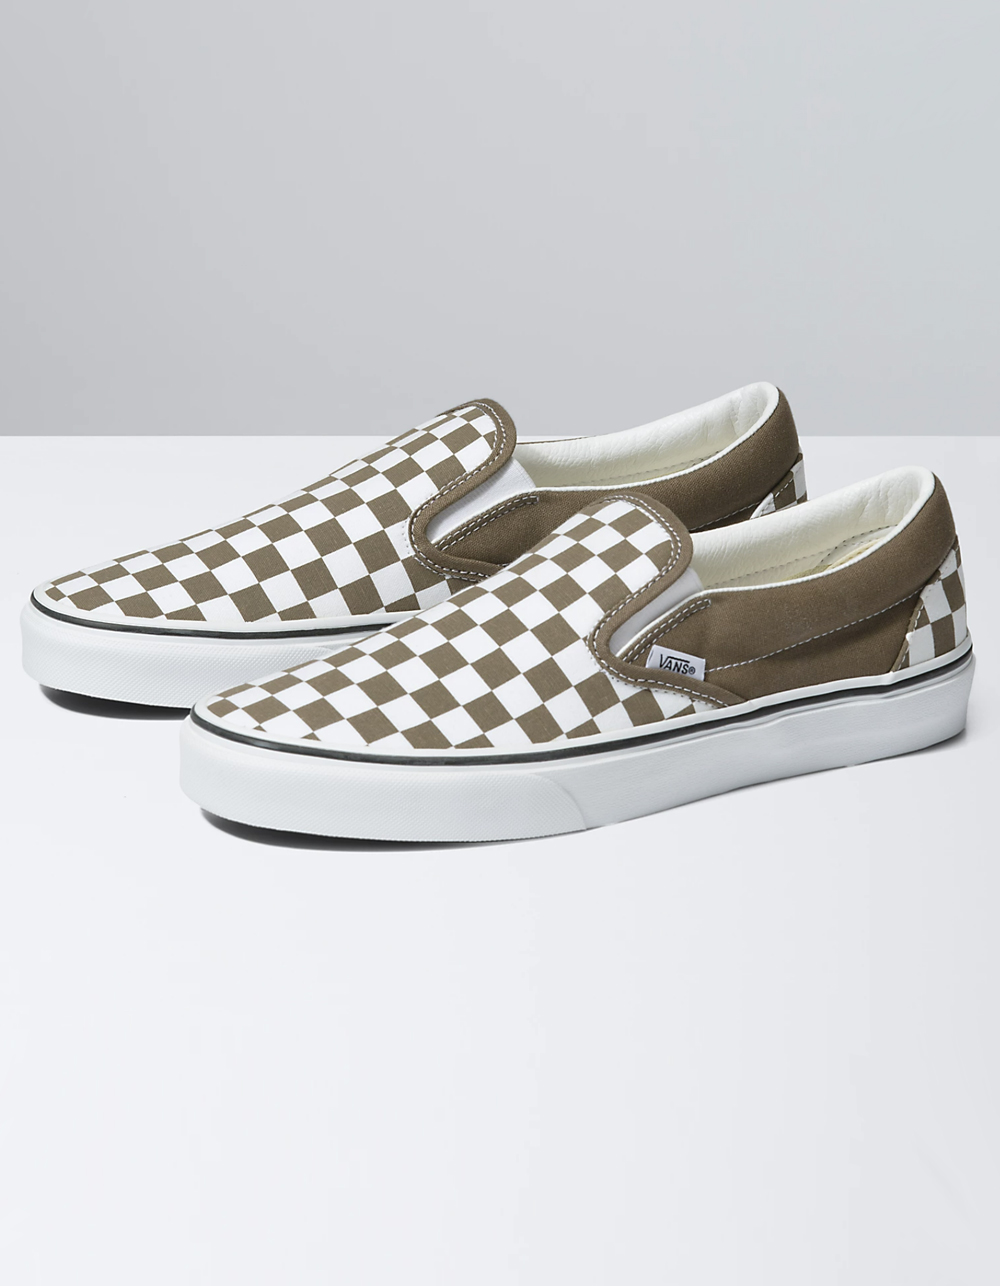 VANS Checkerboard Classic Slip-On Shoes - BROWN | Tillys